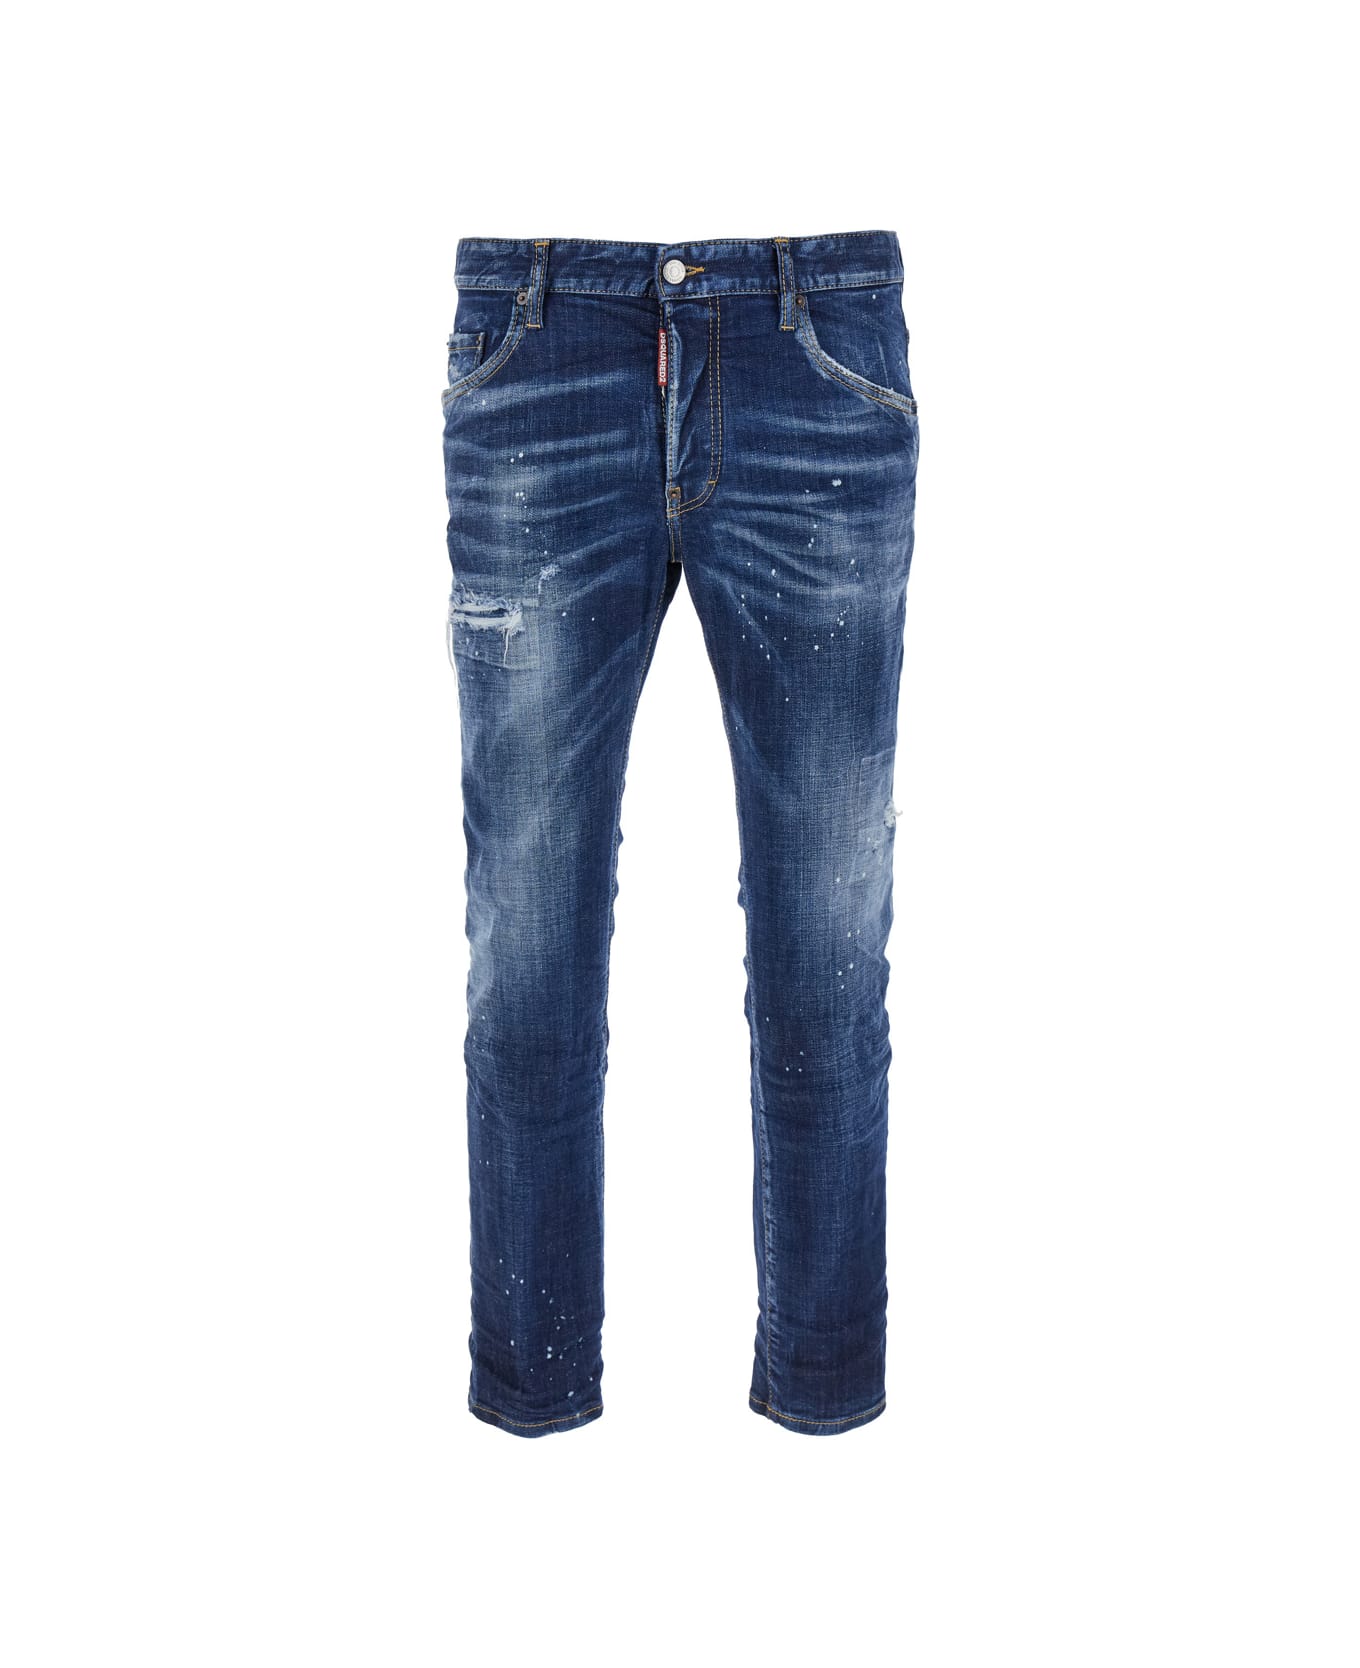 Dsquared2 'skater' Blue Skinny Jeans With Paint Stains In Stretch Cotton Denim Man - Blu